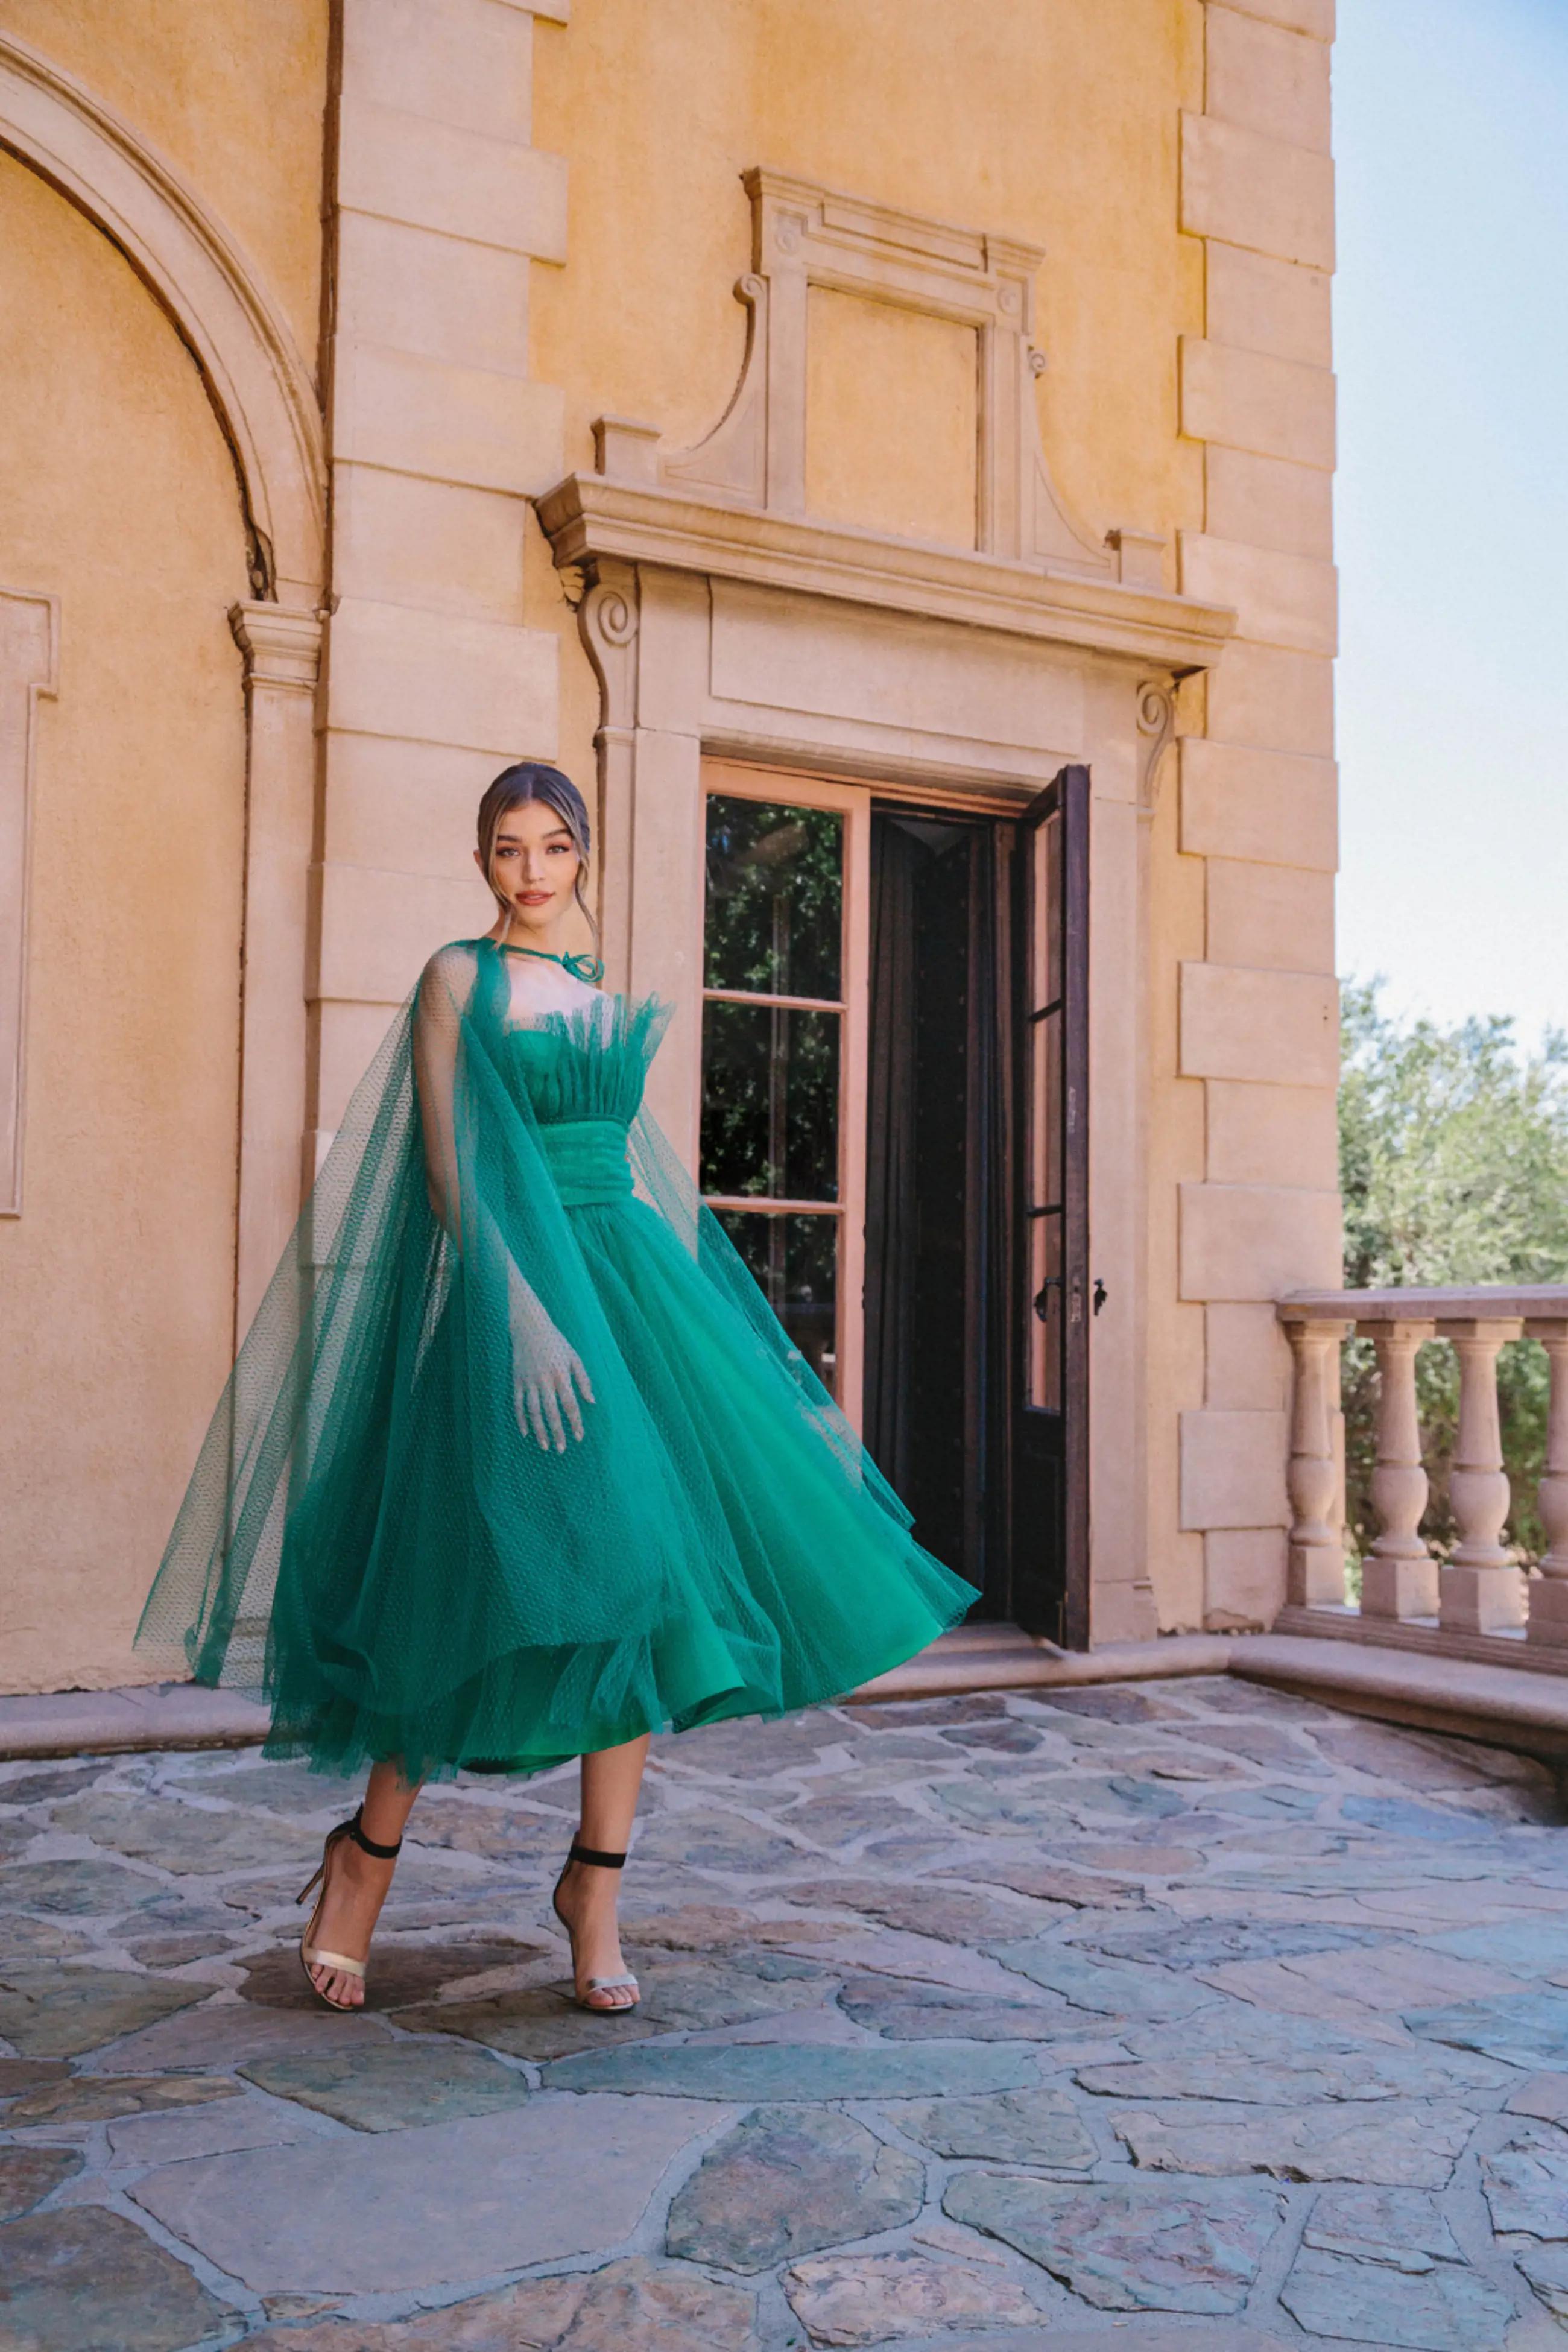 Model wearing a green evening gown